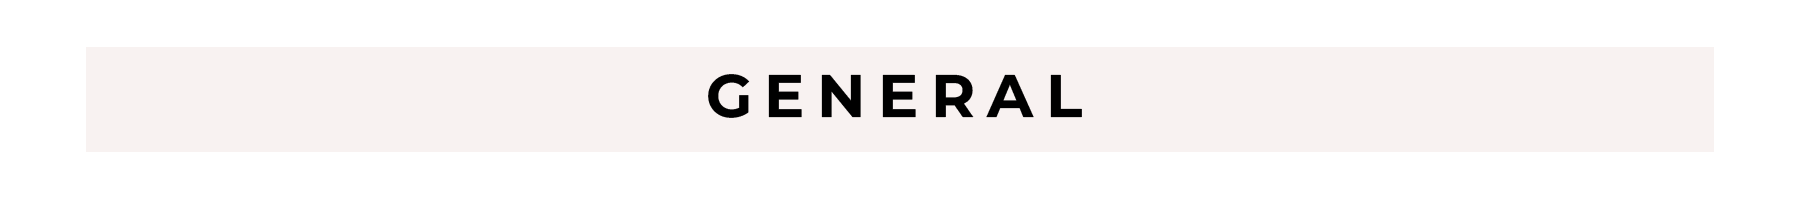 The word general is written in black on a white background.